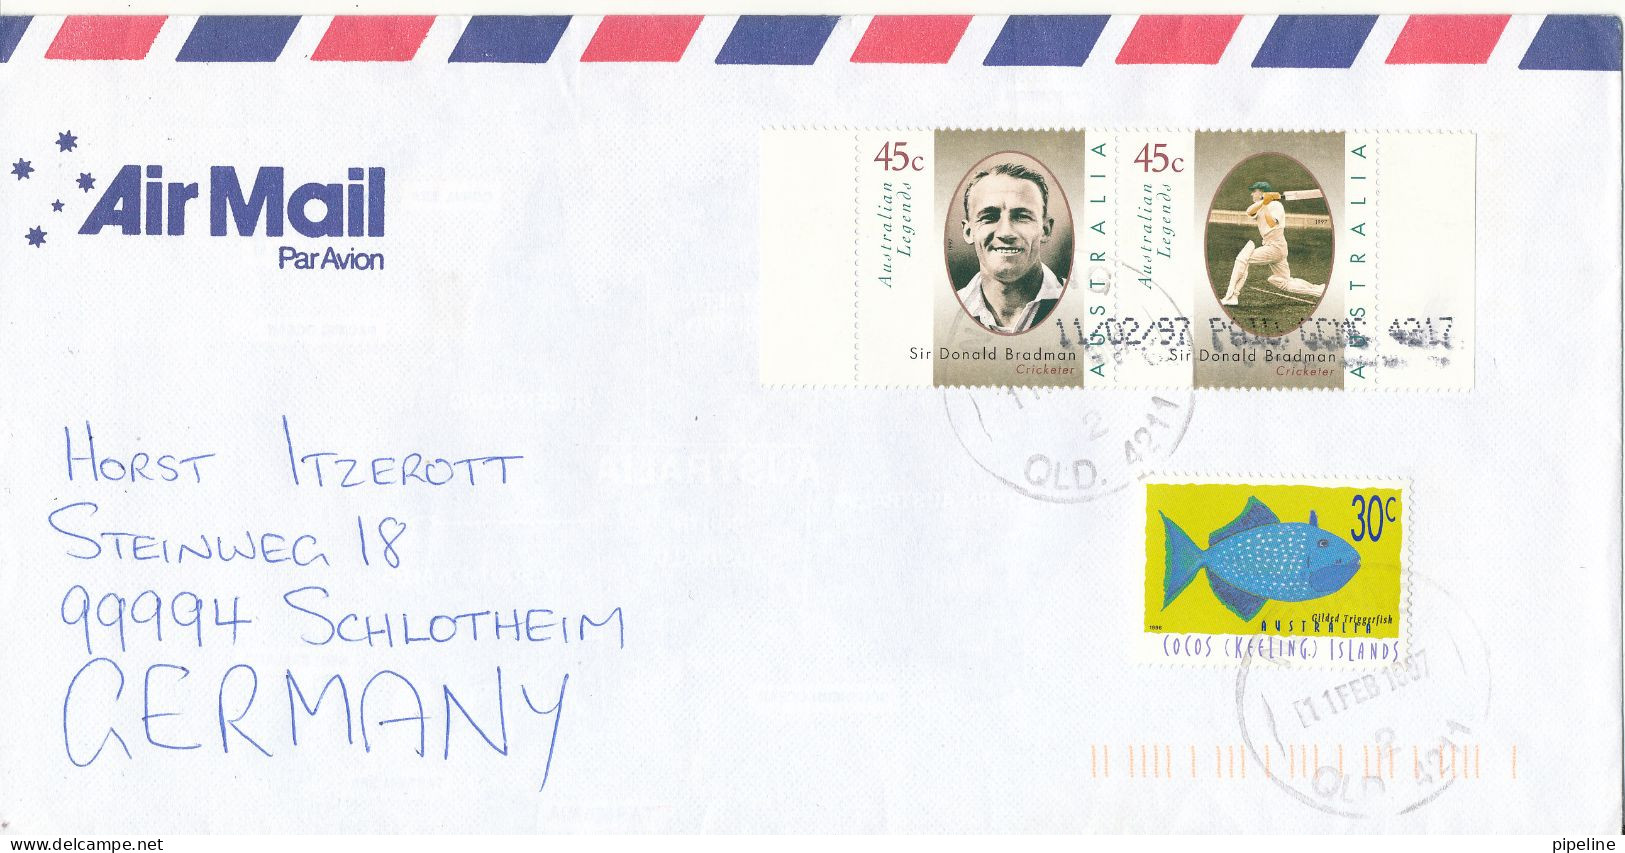 Australia - Cocos Keeling Islands Air Mail Cover Sent To Germany 11-2-1997 Topic Stamps - Covers & Documents